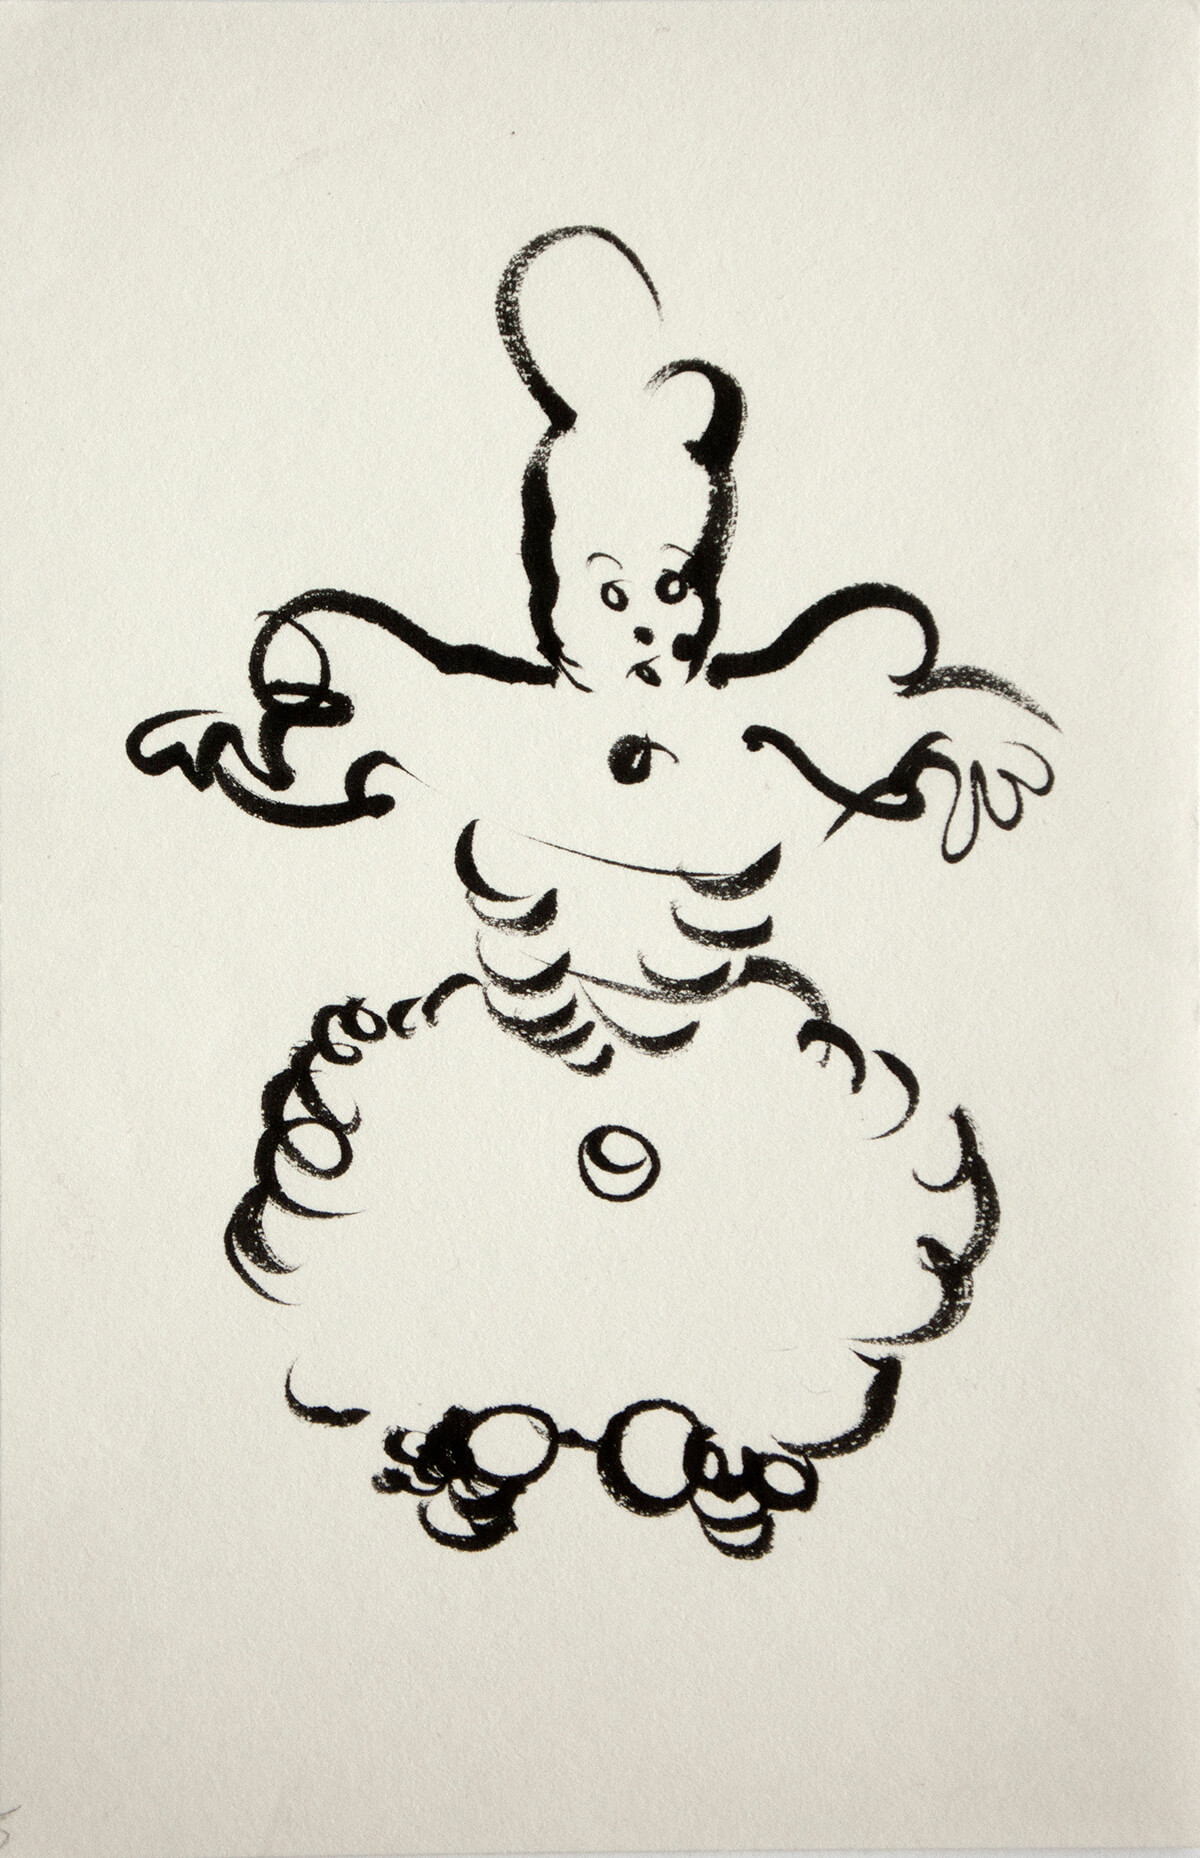 untitled (cloud person), 16 x 10,4 cm, ink on paper, 2002